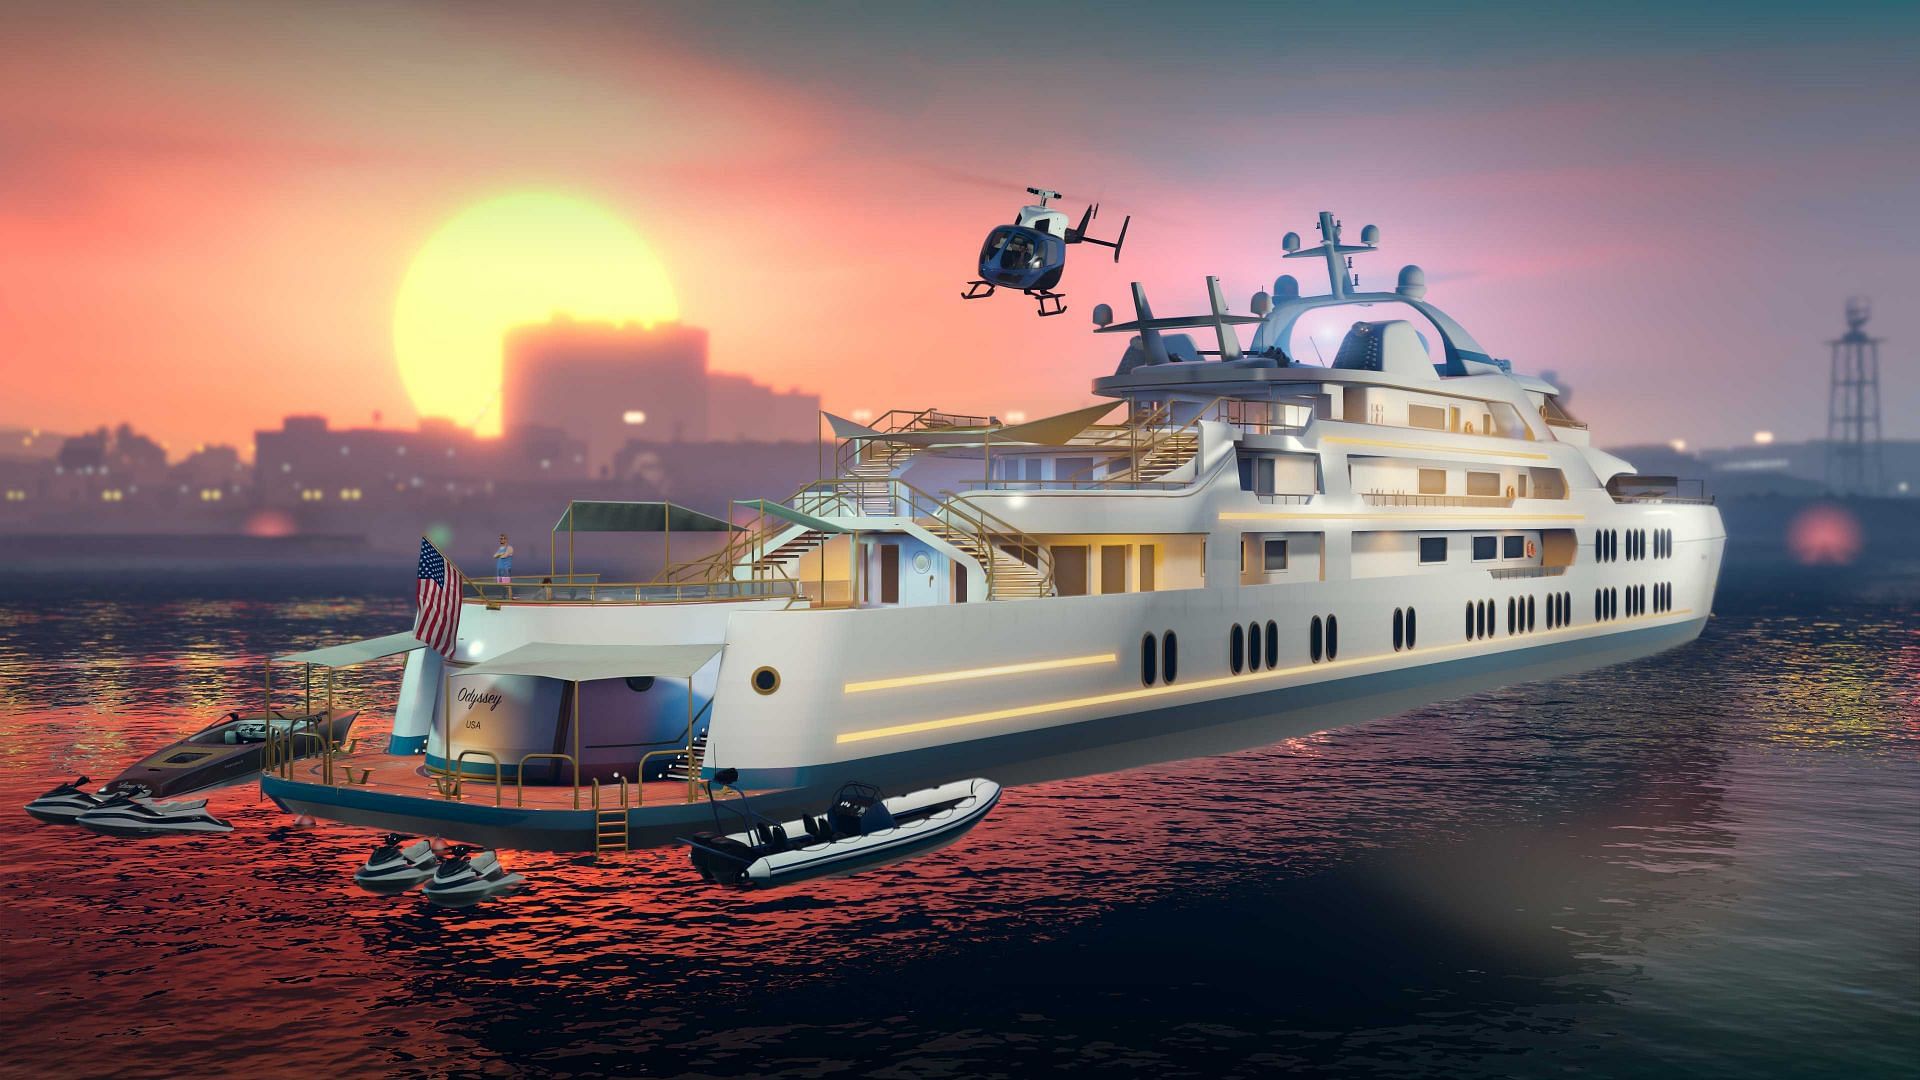 gta online super yacht missions payout